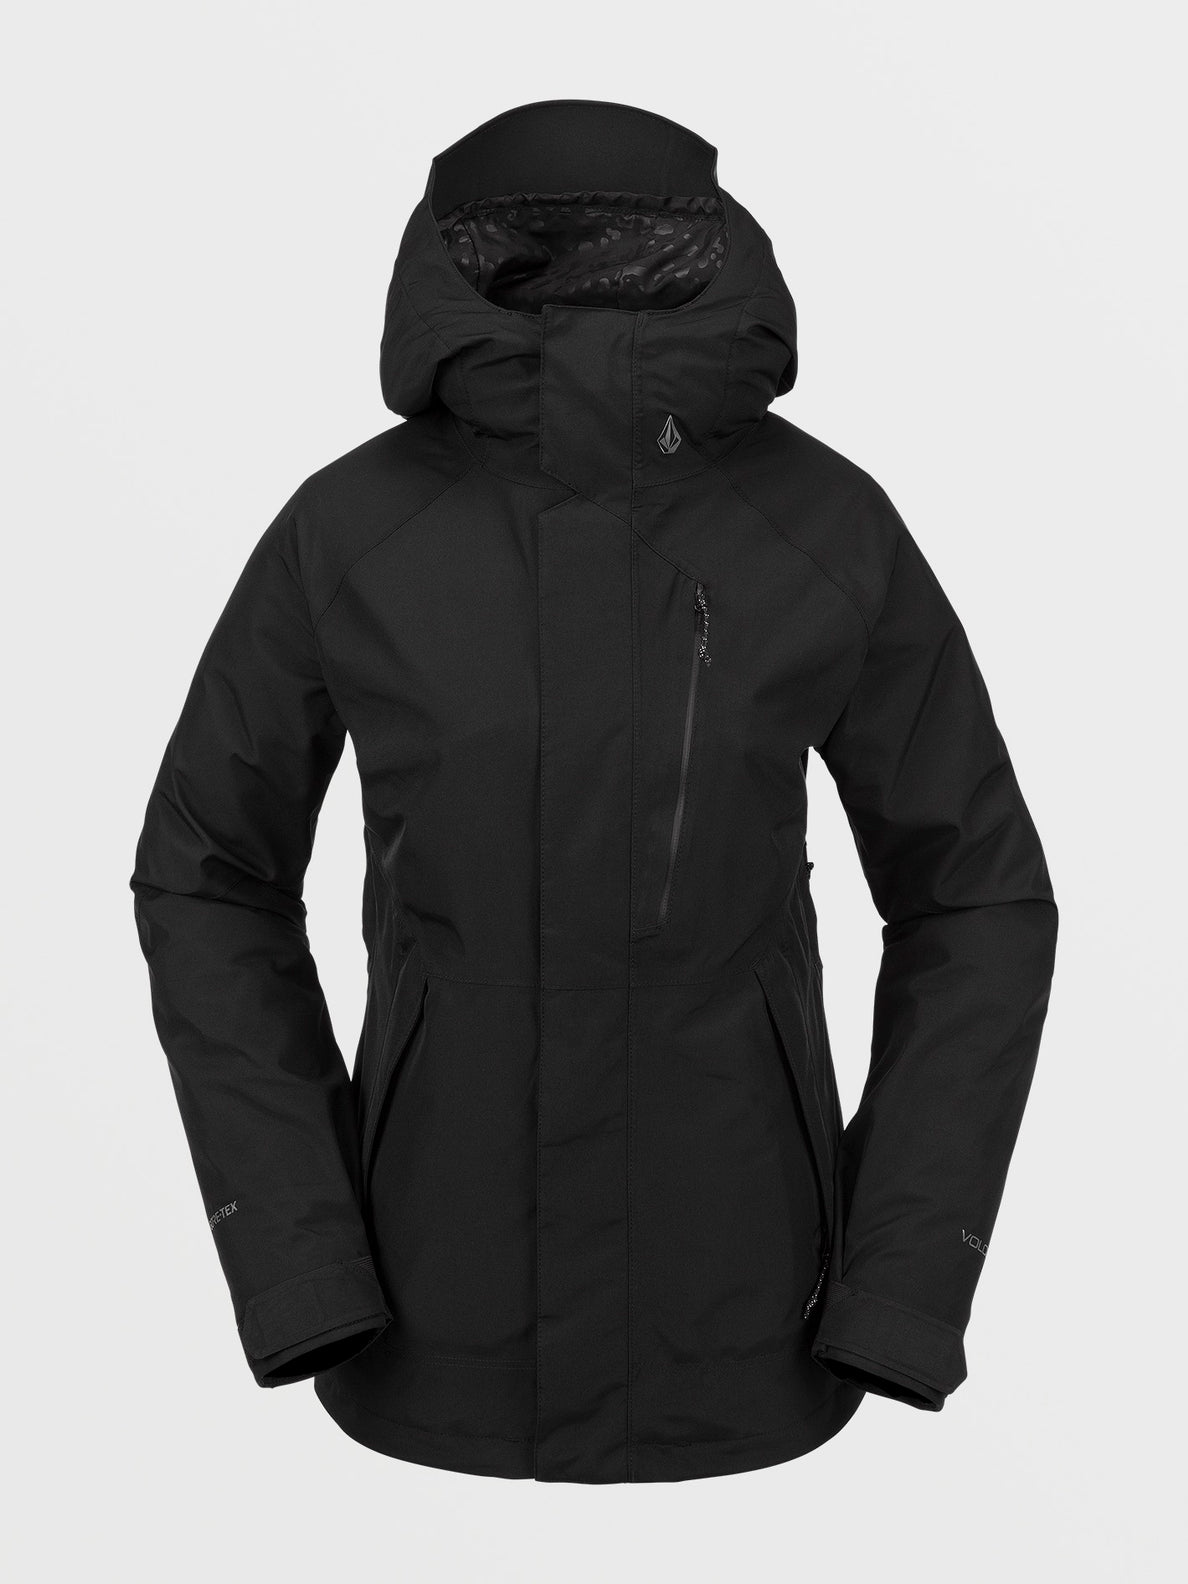 Womens V.Co Aris Insulated Gore Jacket - Black (H0452405_BLK) [F]